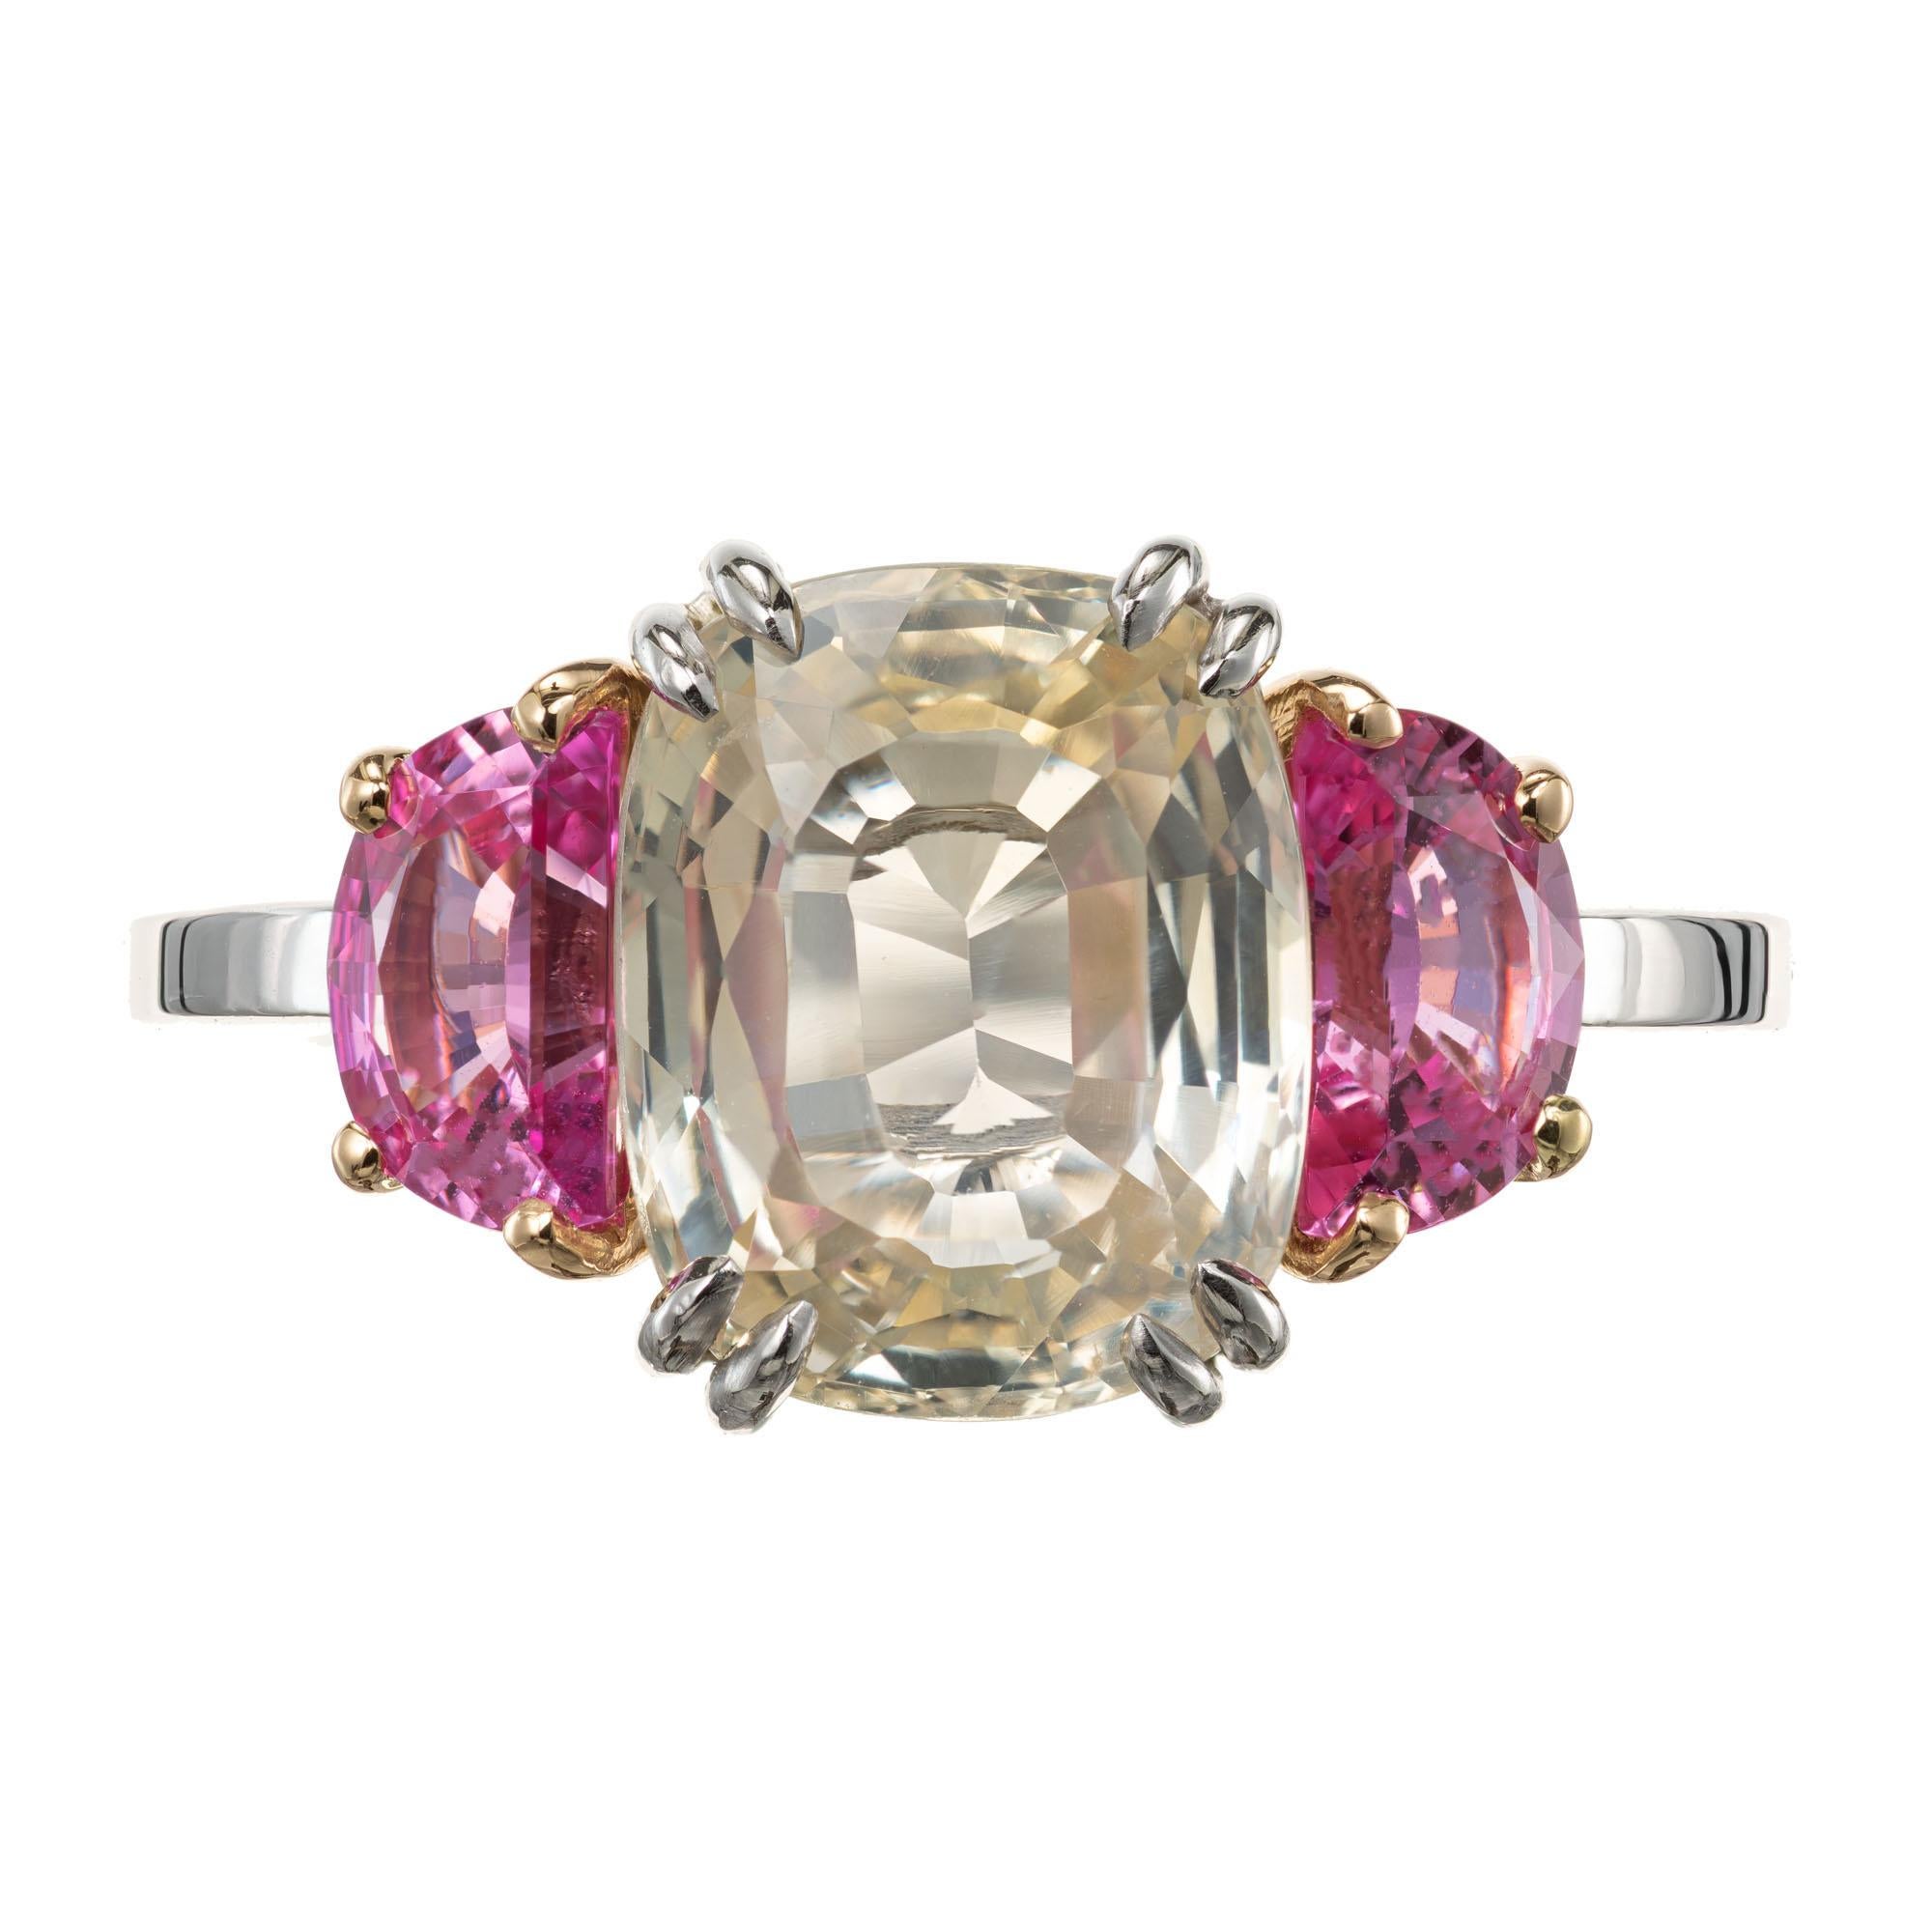 Cushion cut light yellow sapphire and two bright pink half moon sapphires. 3.91ct sapphire center stone, with tow pink sapphire accent diamonds in a three-stone engagement ring setting created by the Peter Suchy Workshop

1 cushion cut light yellow